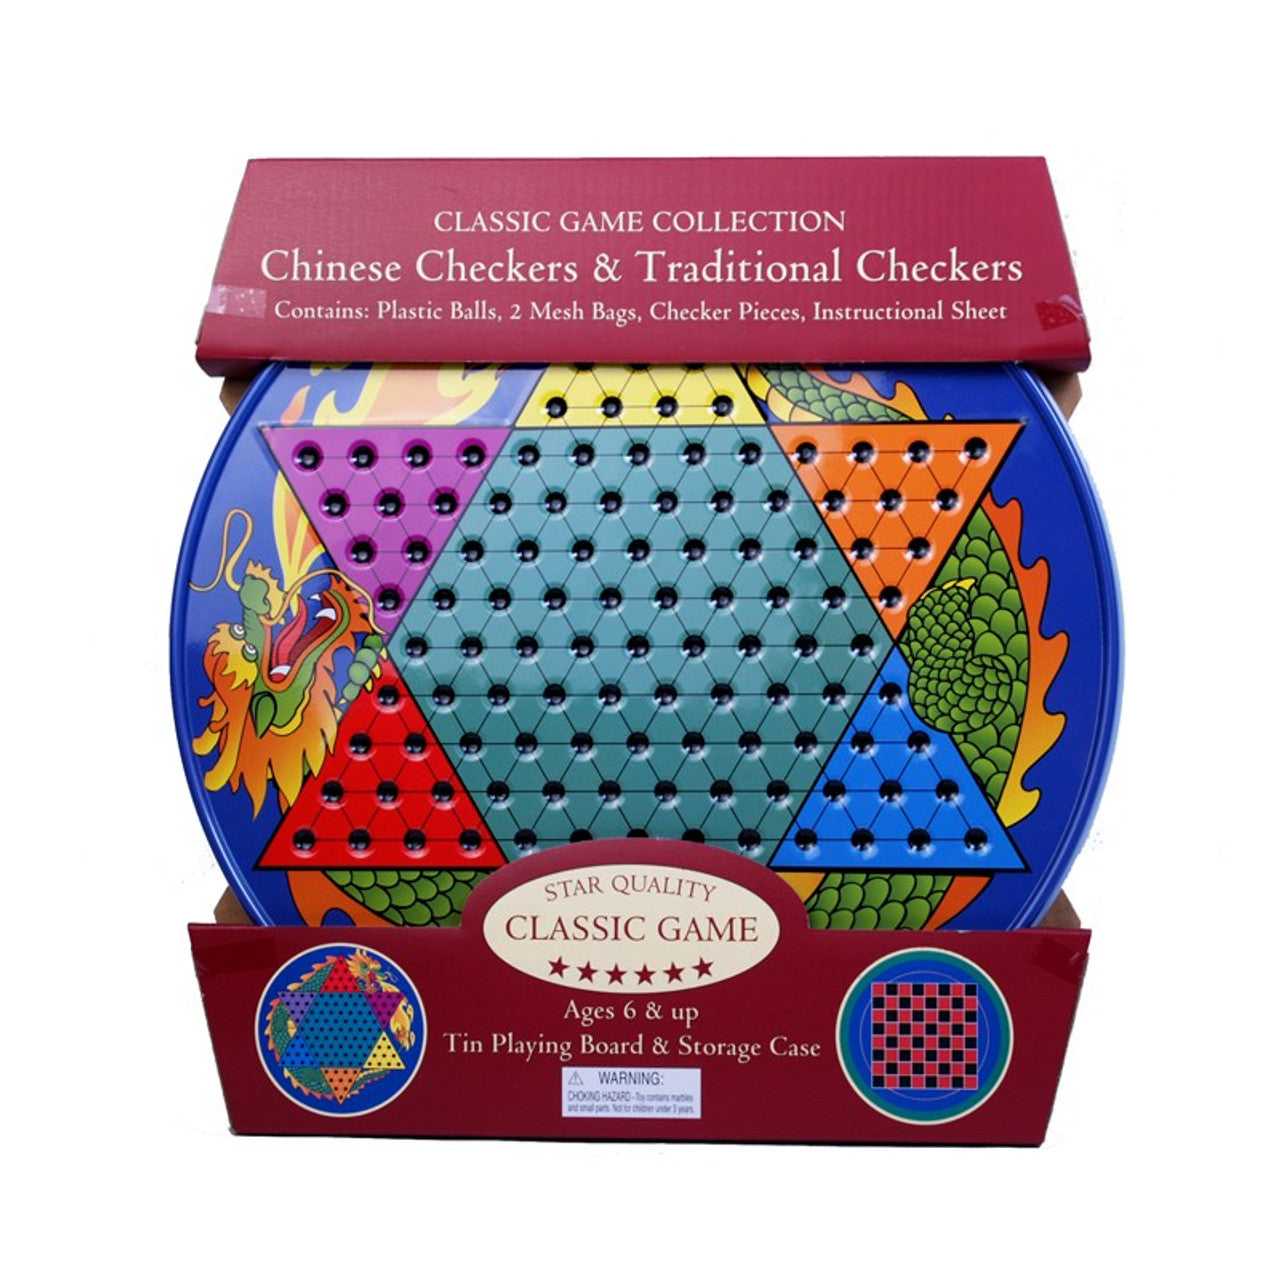 Chinese Checkers & Traditional Checkers